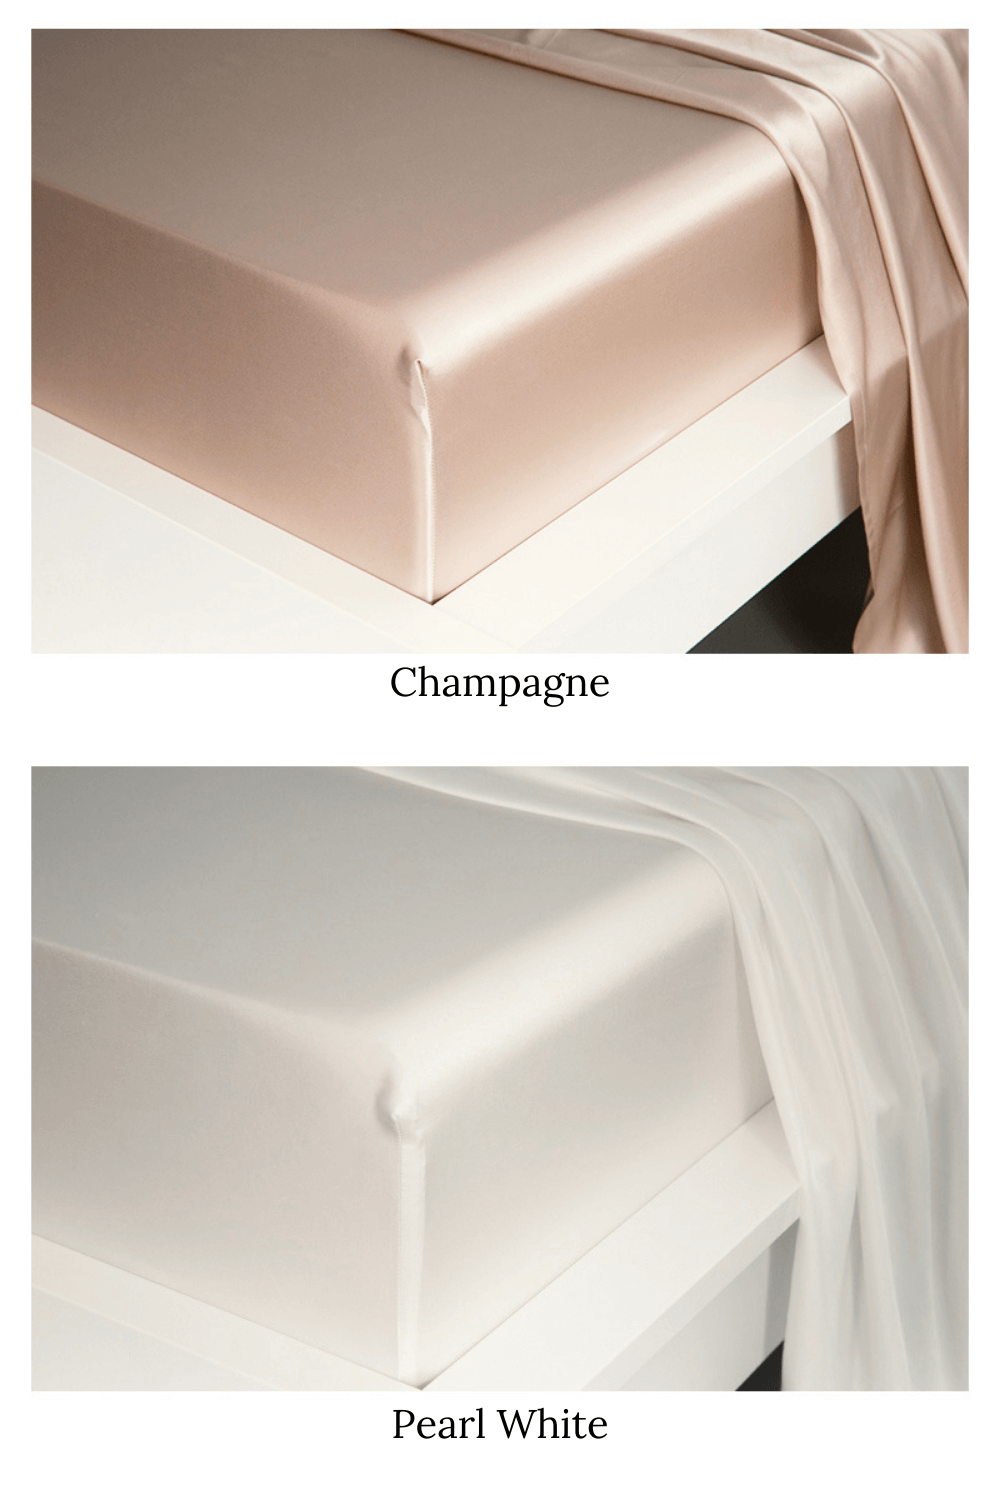 Silk Bed Sheets - Champagne - BASK ™